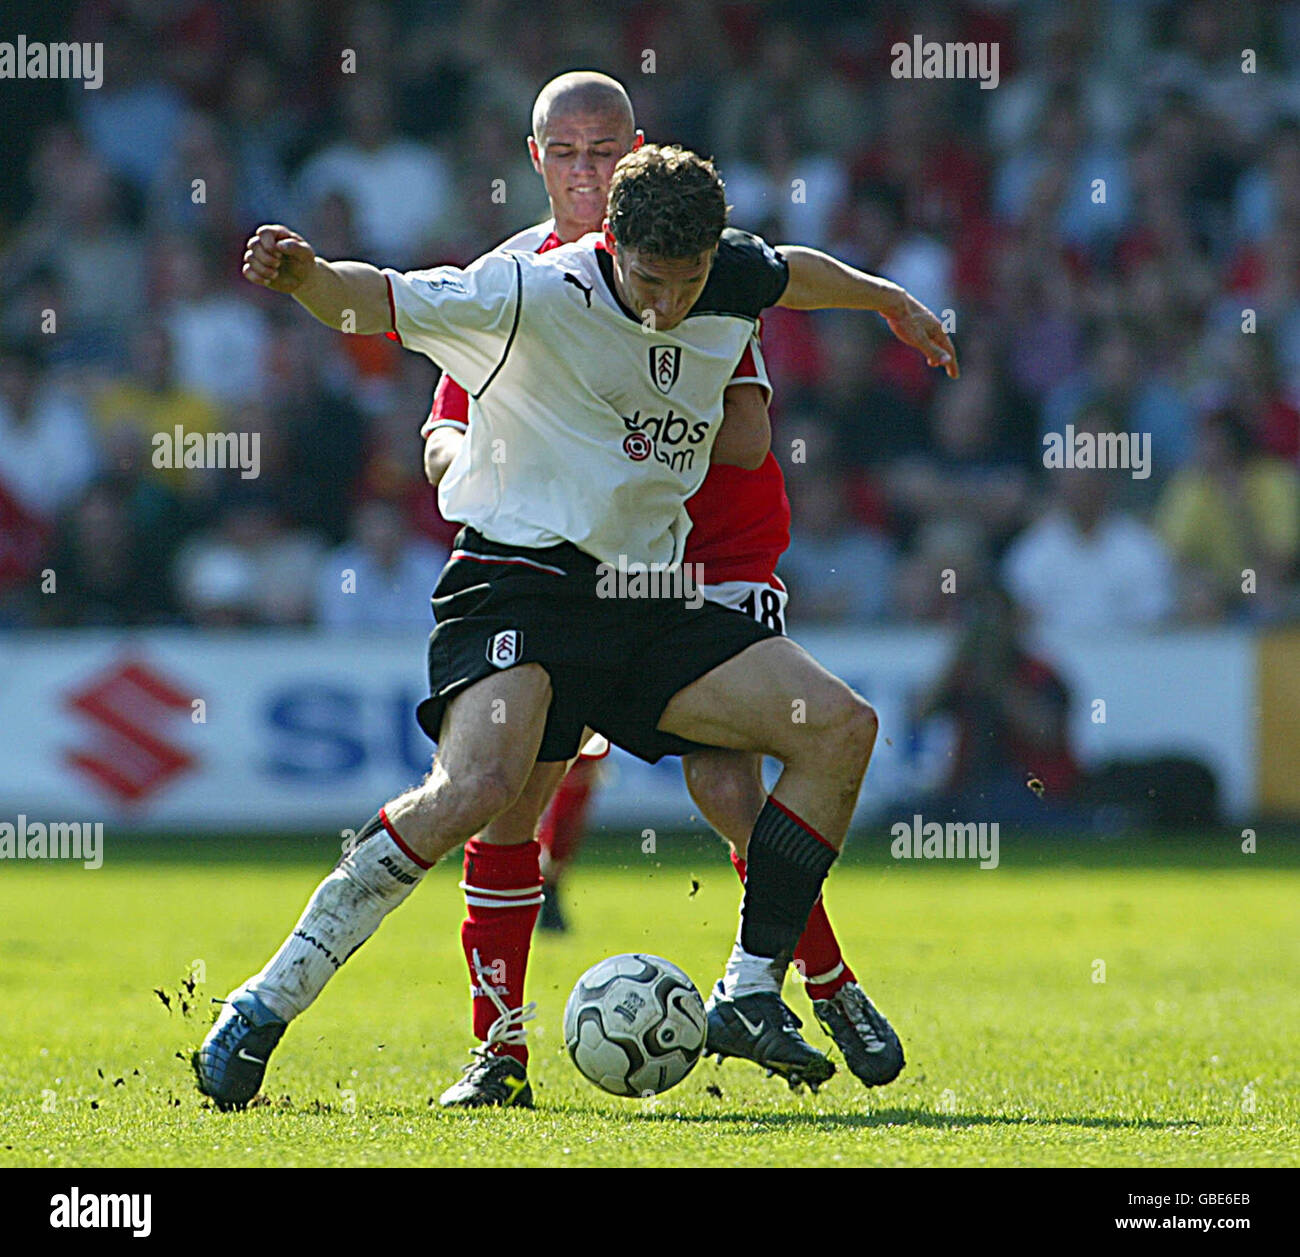 Soccer - FA Barclaycard Premiership - Fulham v Charlton Athletic. Fulham's Moritz Volz and Charlton Athletic's Paul Konchesky battle for the ball Stock Photo